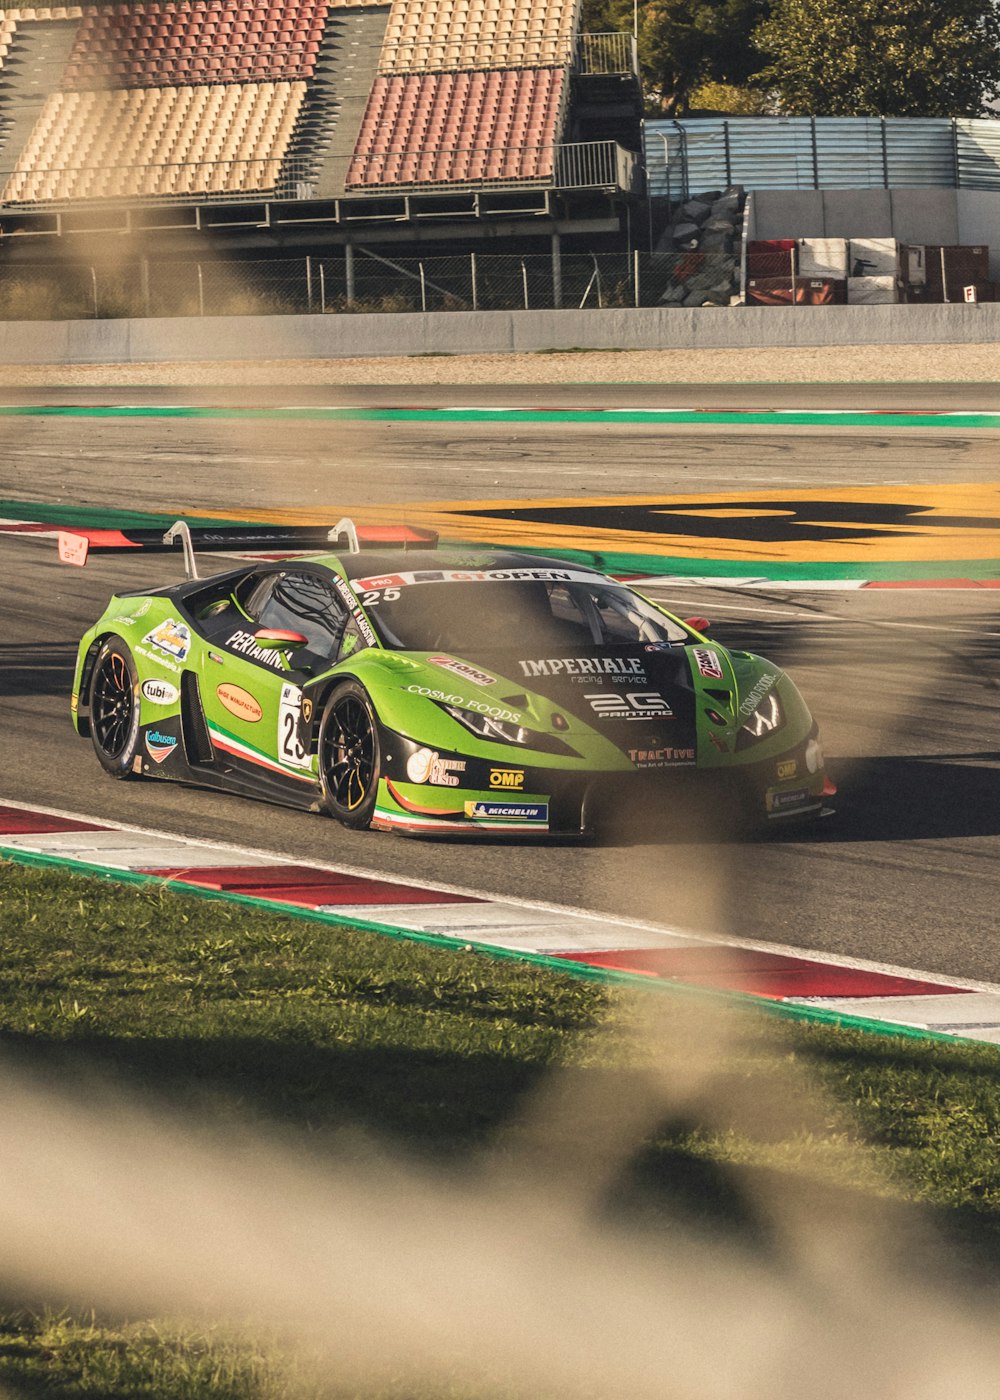 green and black Lamborghini race car on track during daytime